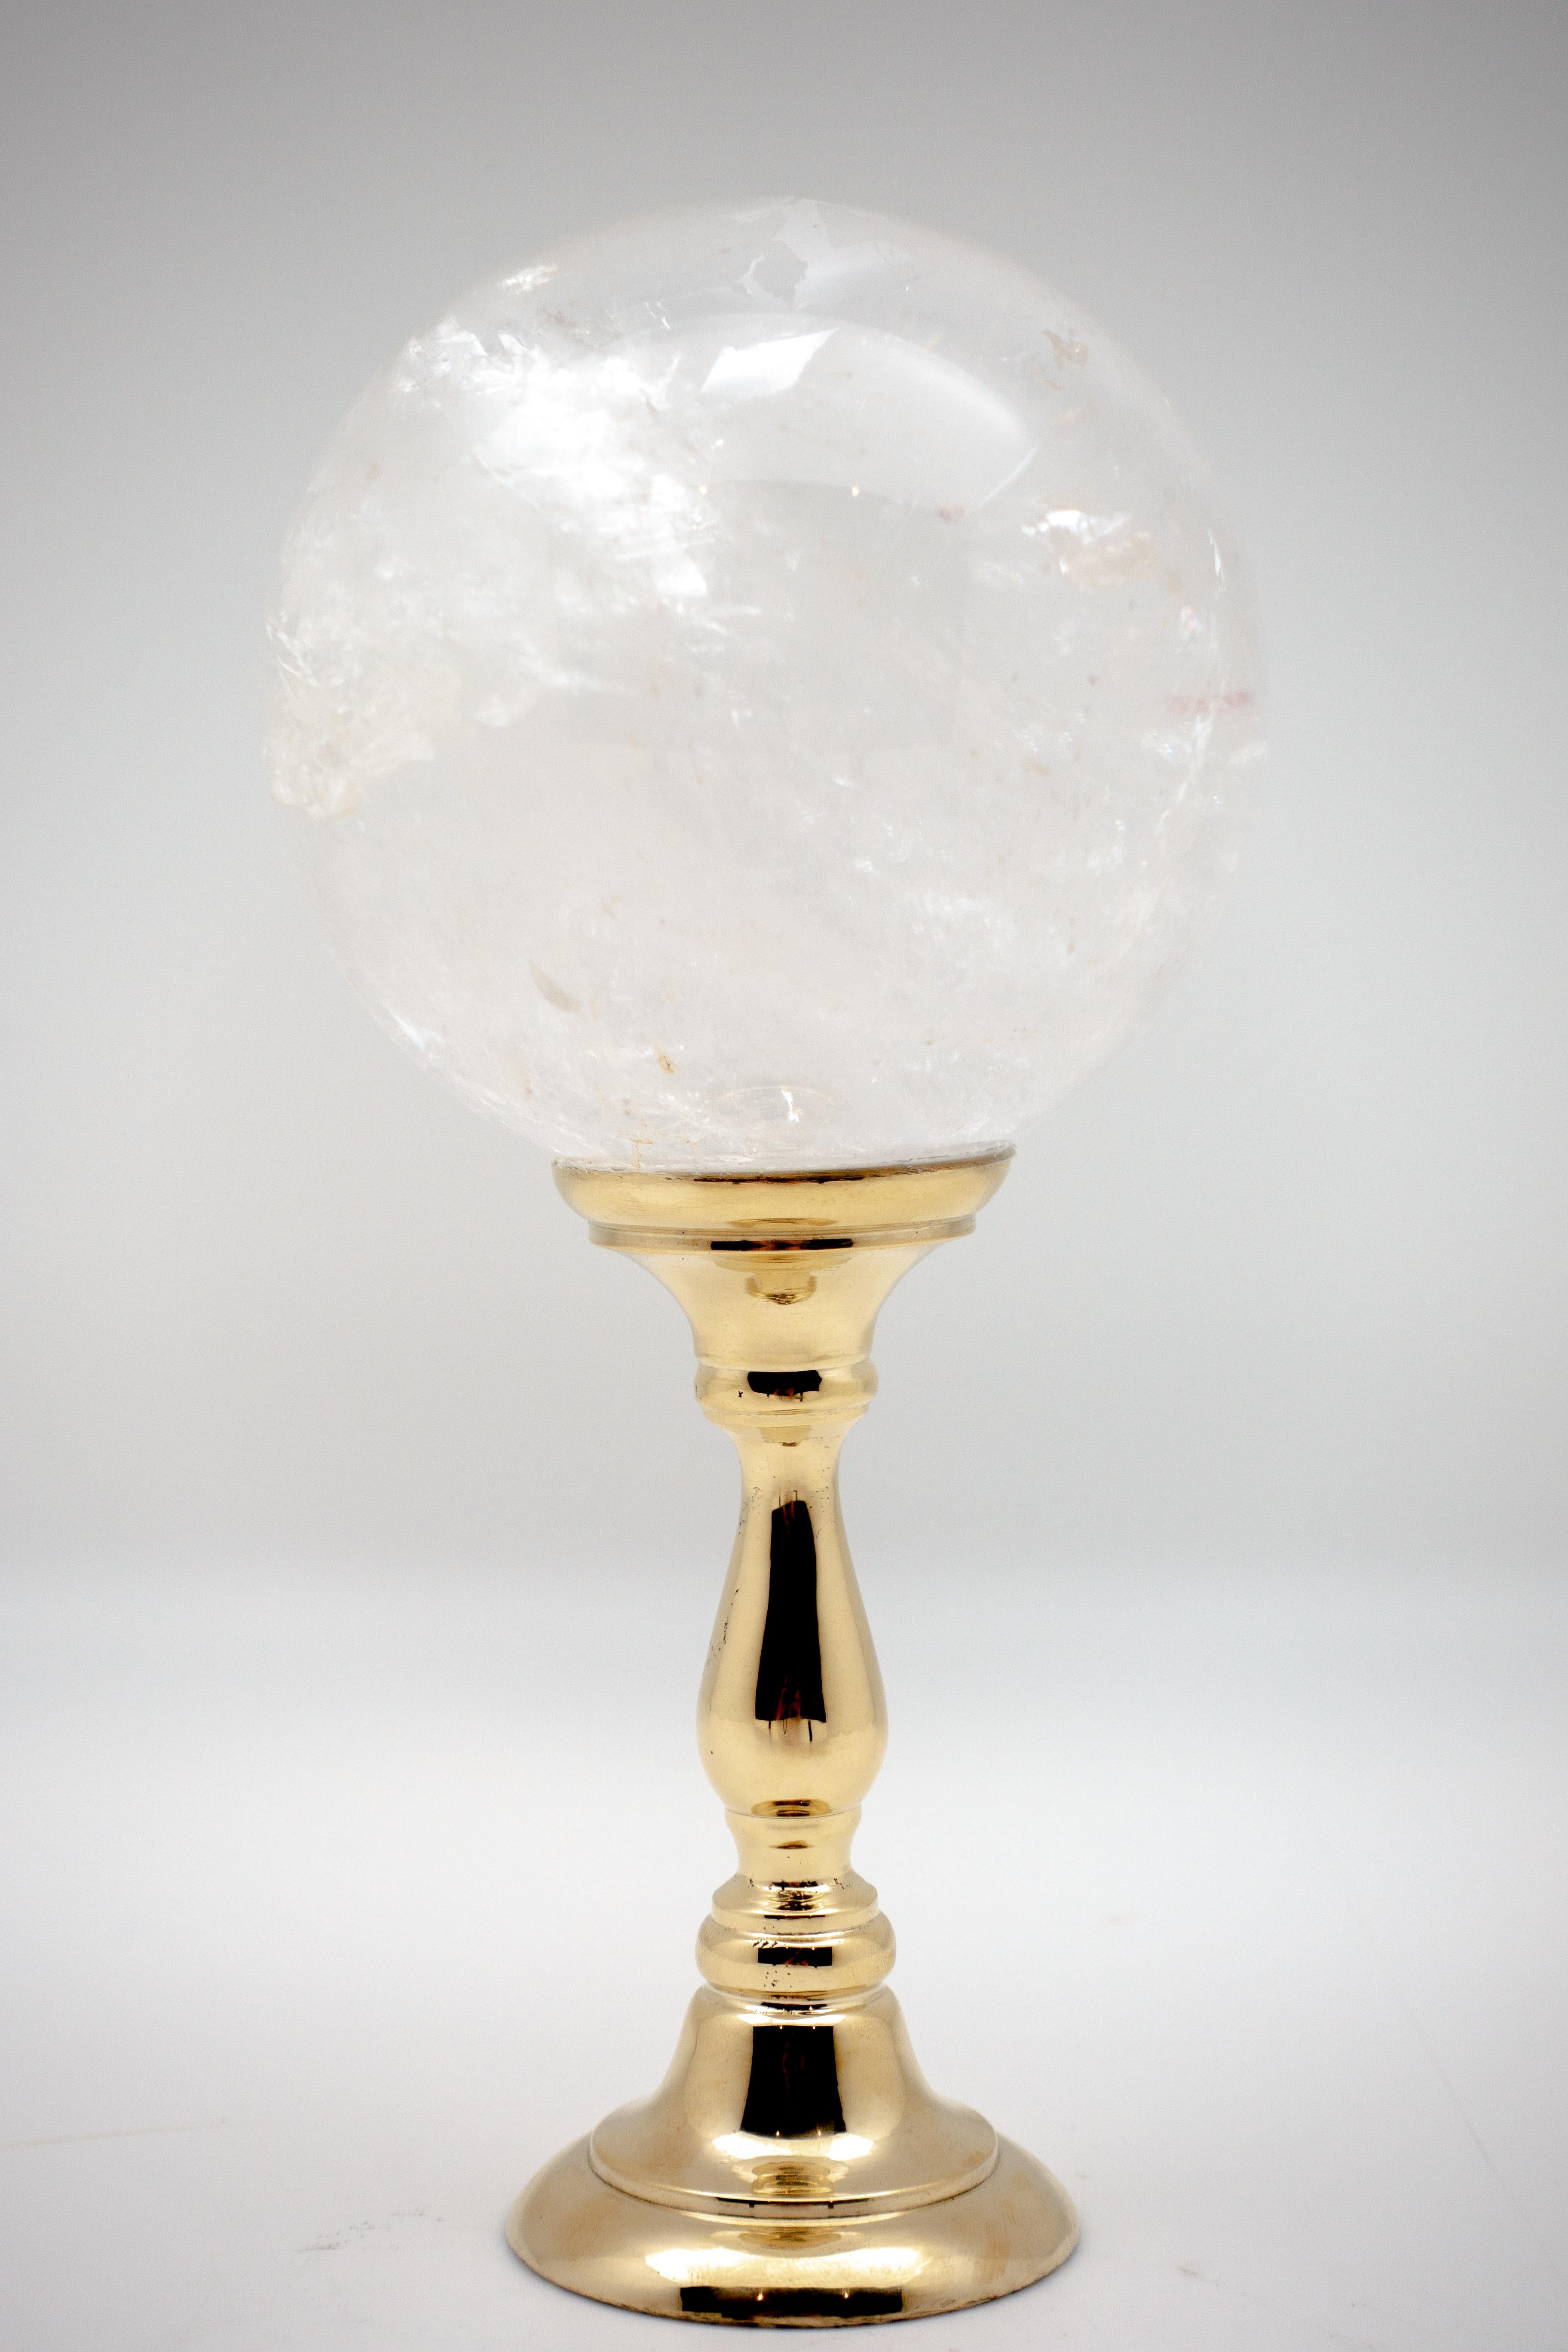 Rock crystal sphere mounted on a brass stand. Rock crystal, a form of quartz, has been used in jewelry and ornaments since antiquity, and is the purest form of quartz discovered. Measures: 3.5